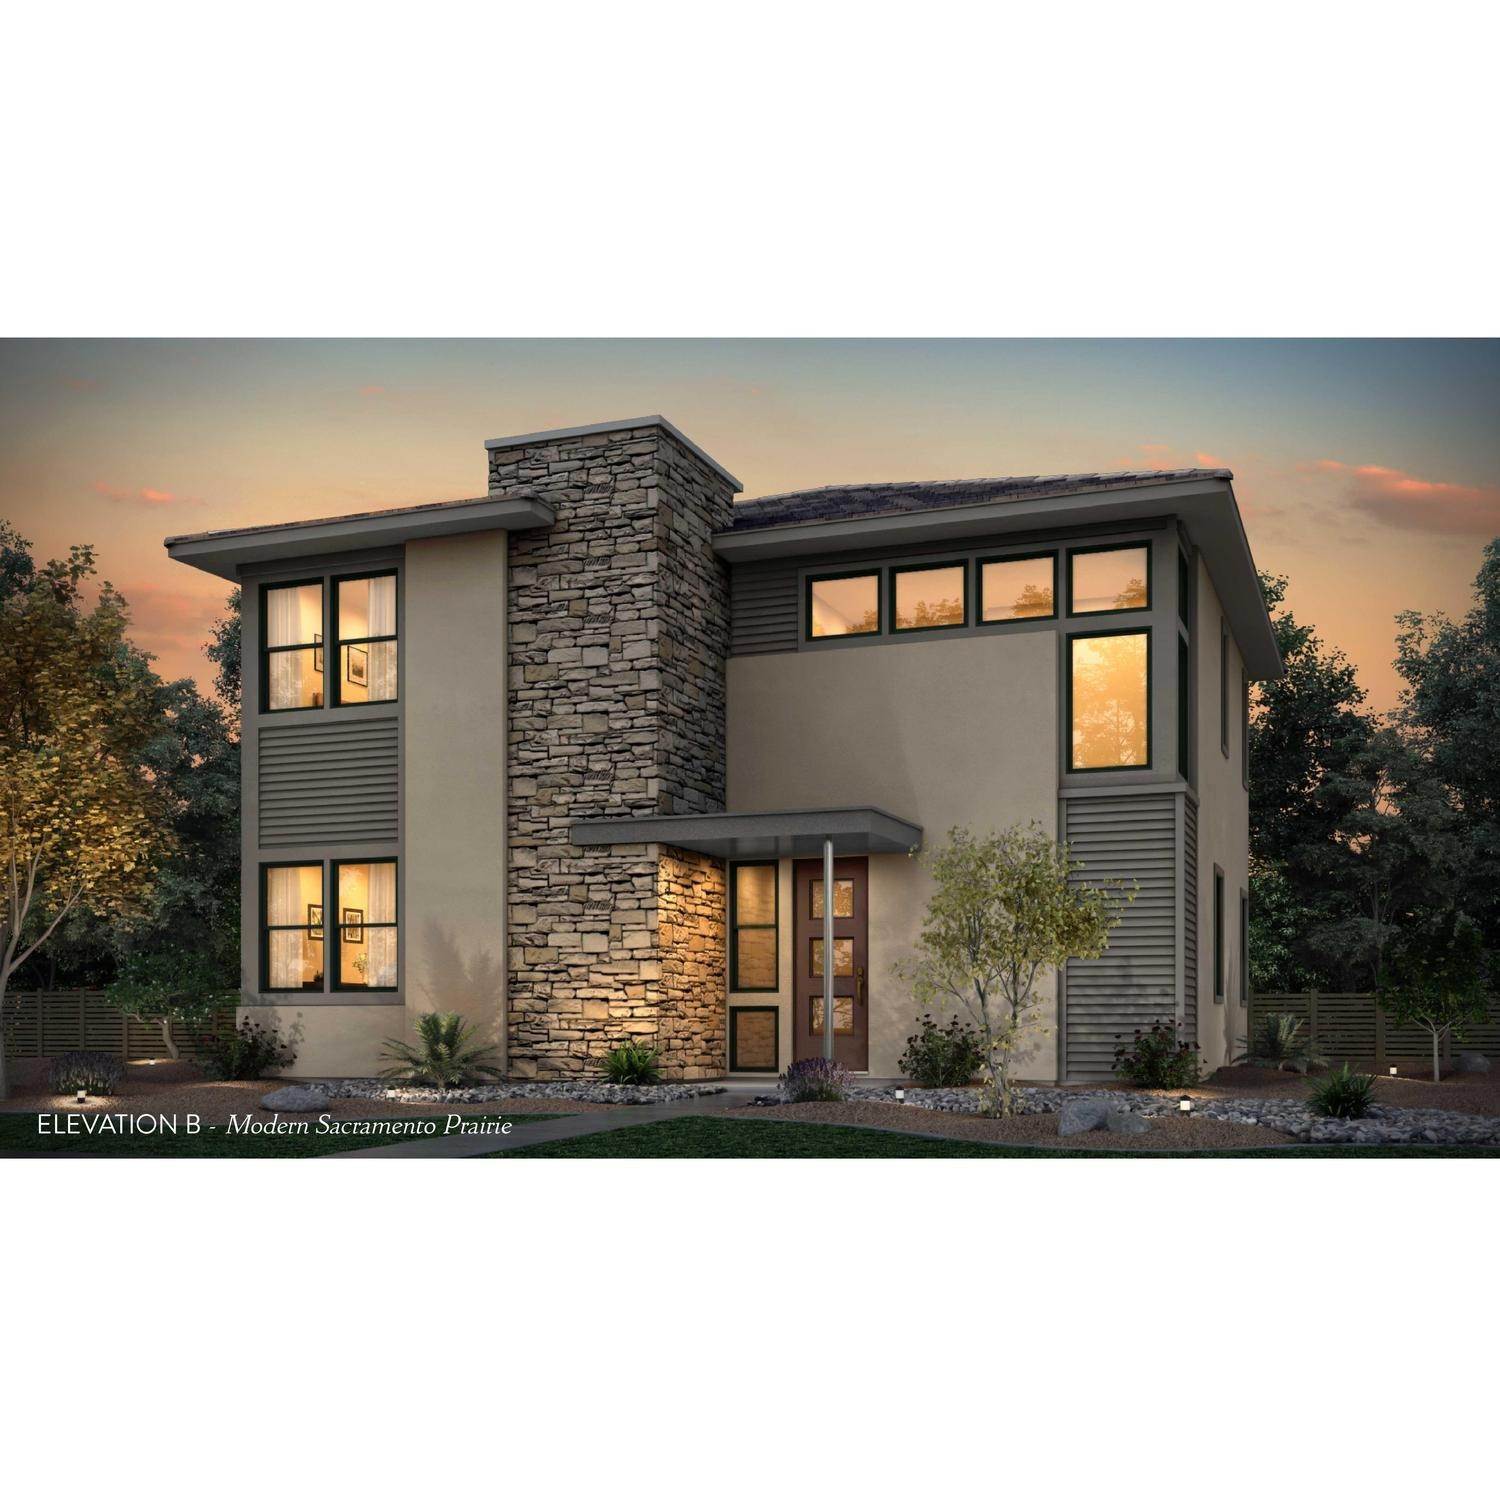 Single Family for Active at Sutter Park-The Classics - Residence Two 5100 Sutter Park Way SACRAMENTO, CALIFORNIA 95819 UNITED STATES